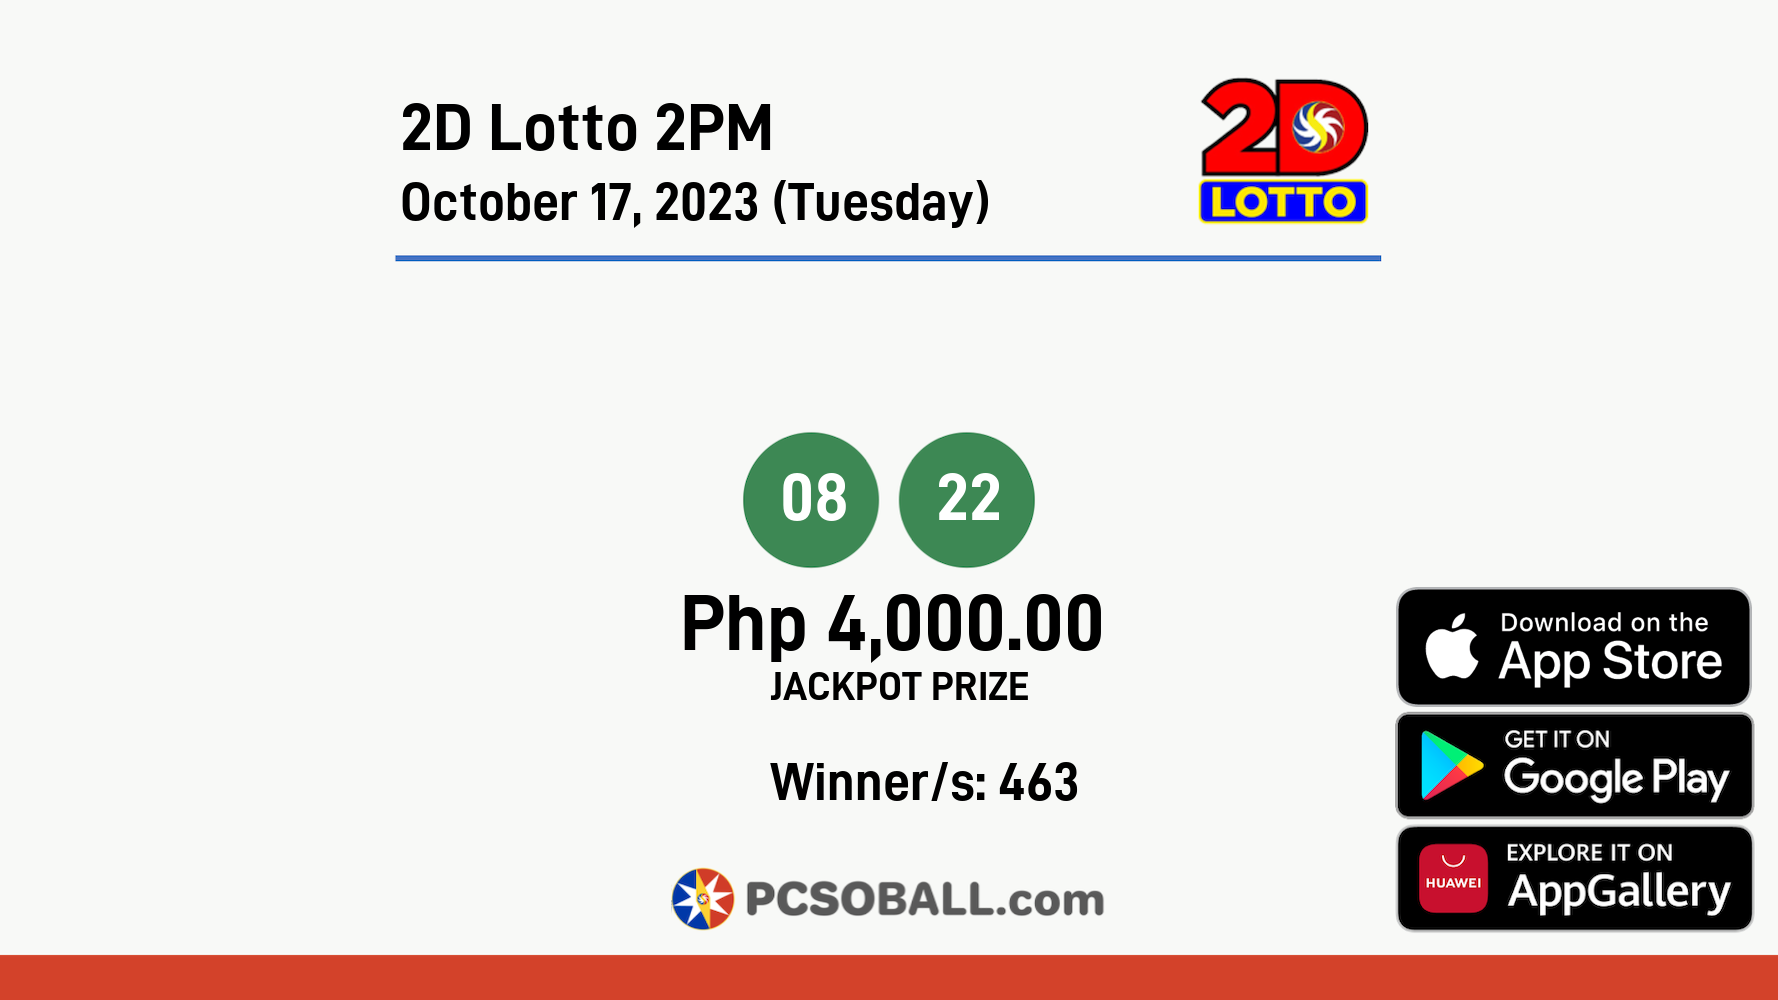 2D Lotto 2PM October 17, 2023 (Tuesday) Result